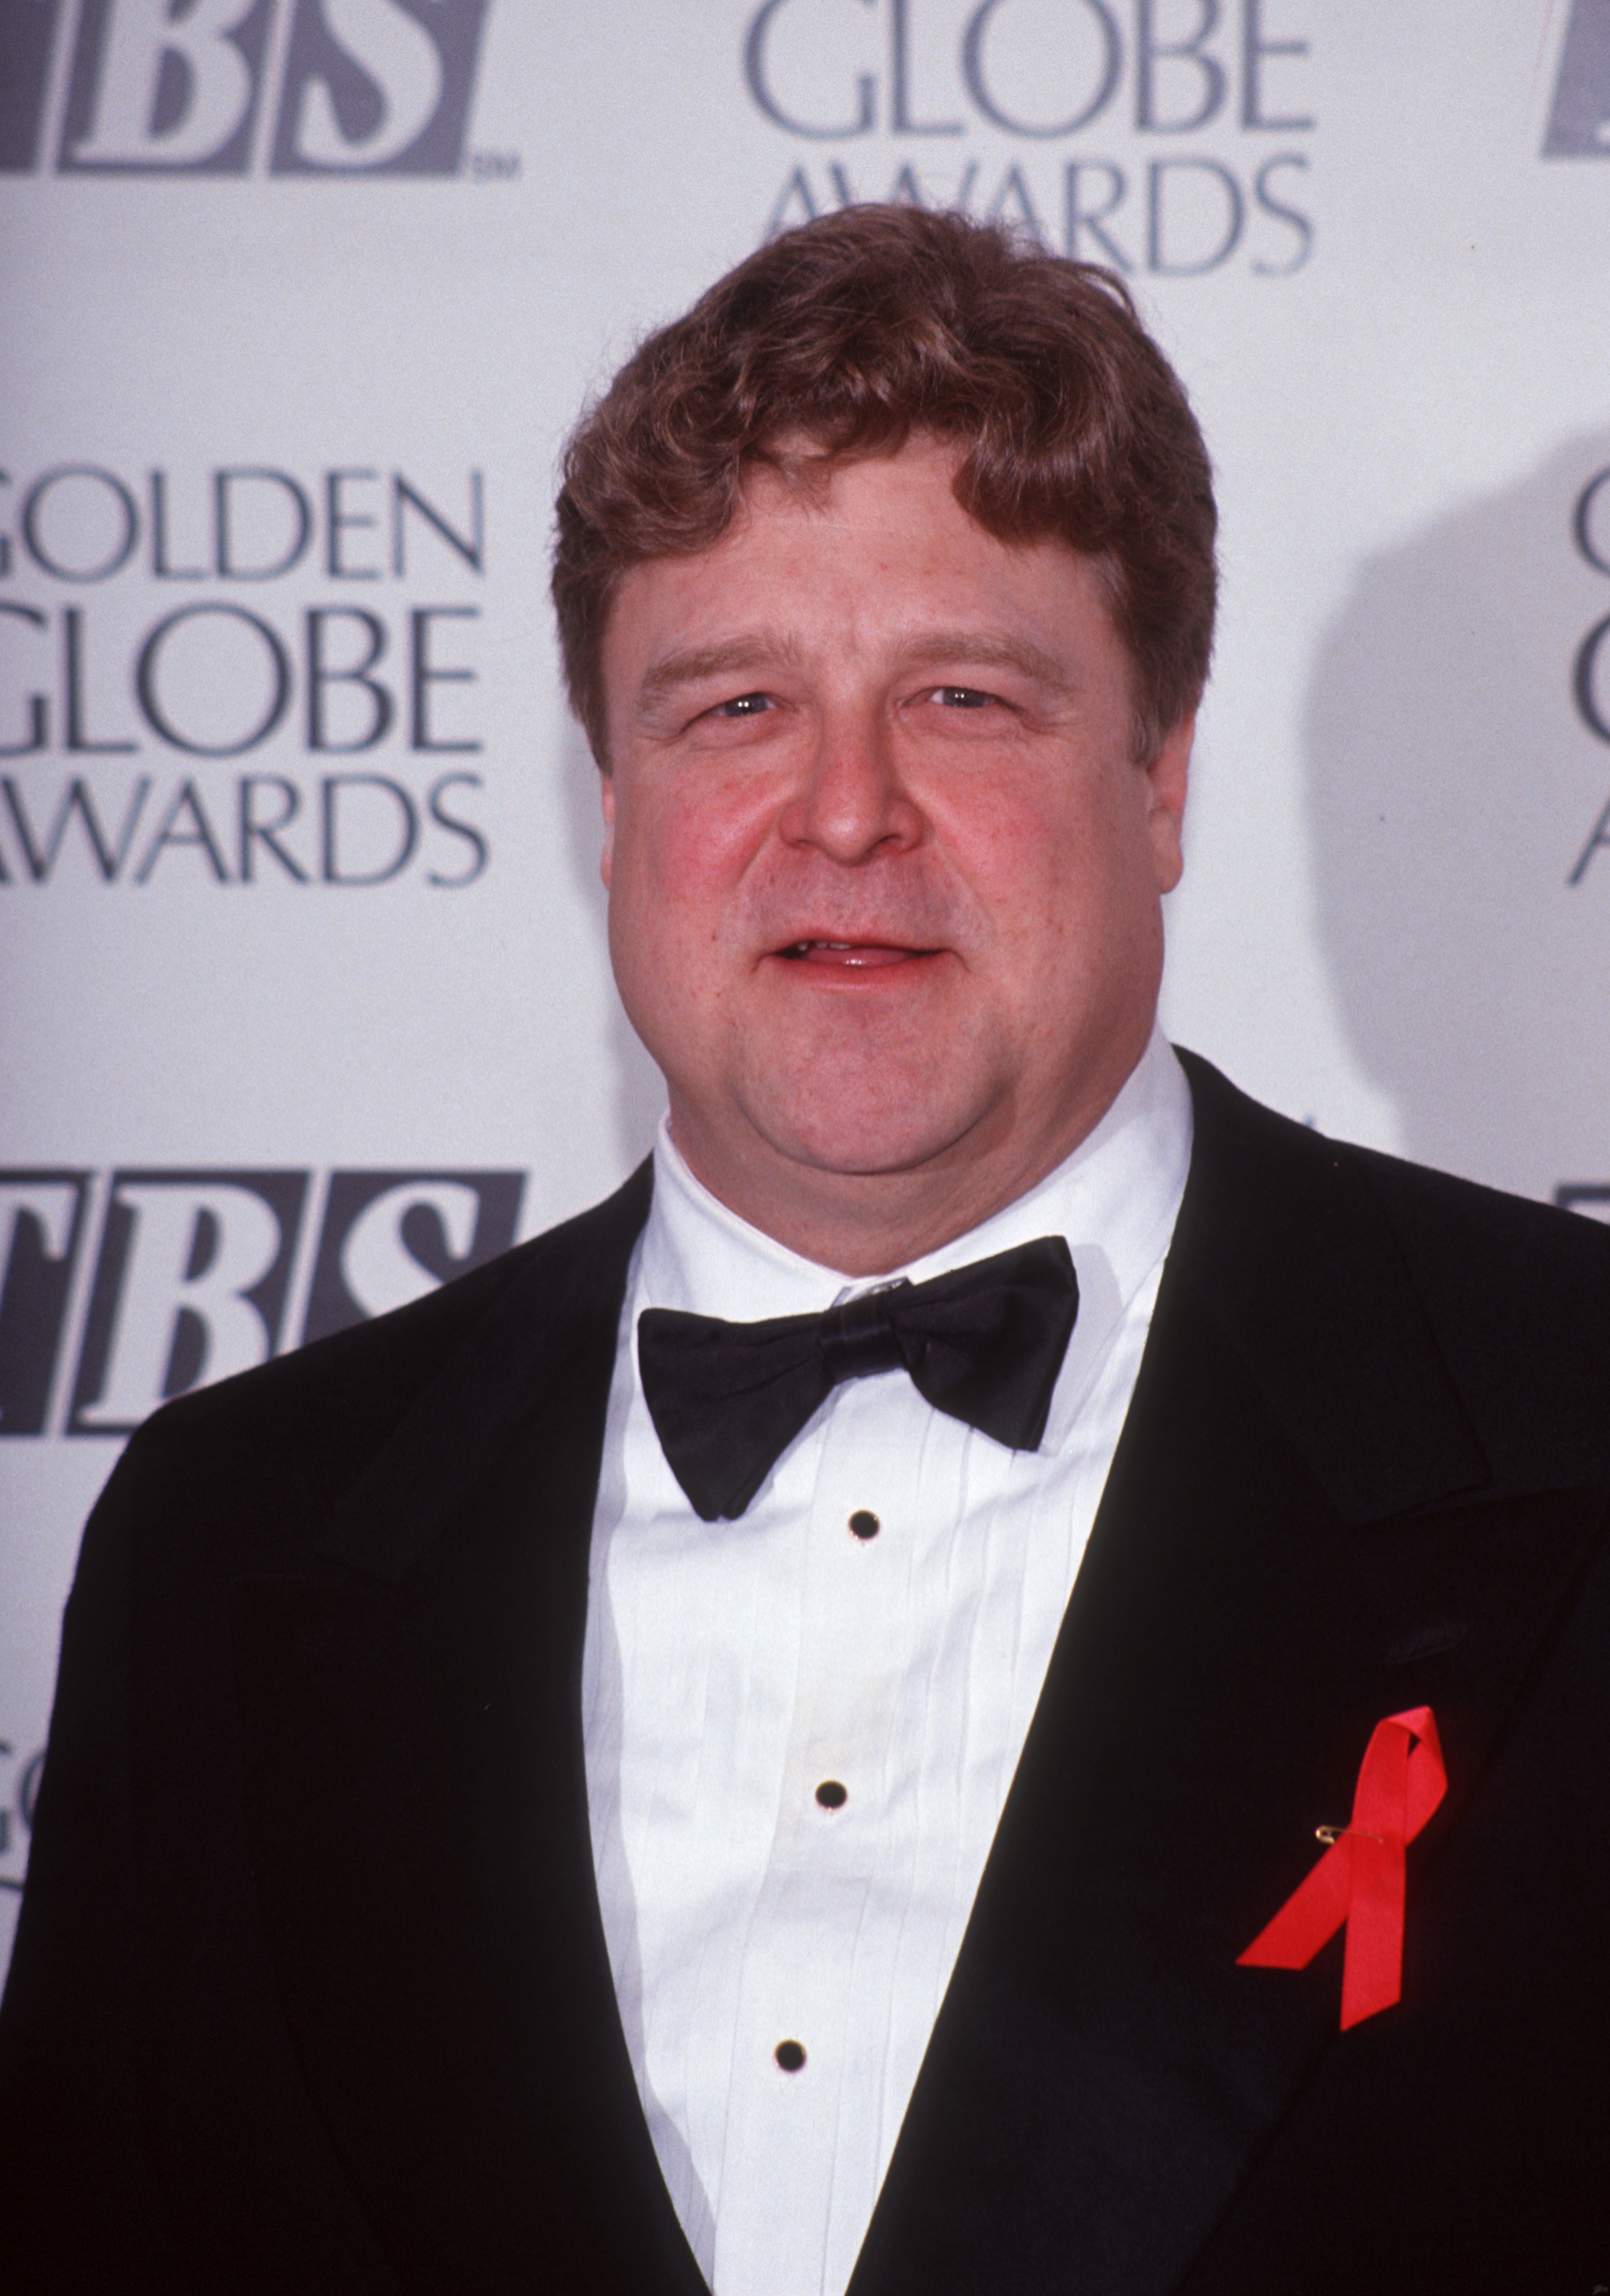 John Goodman at the 50th Annual Golden Globe Awards on January 23, 1993 at the Beverly Hilton Hotel in Beverly Hills, California | Source: Getty Images